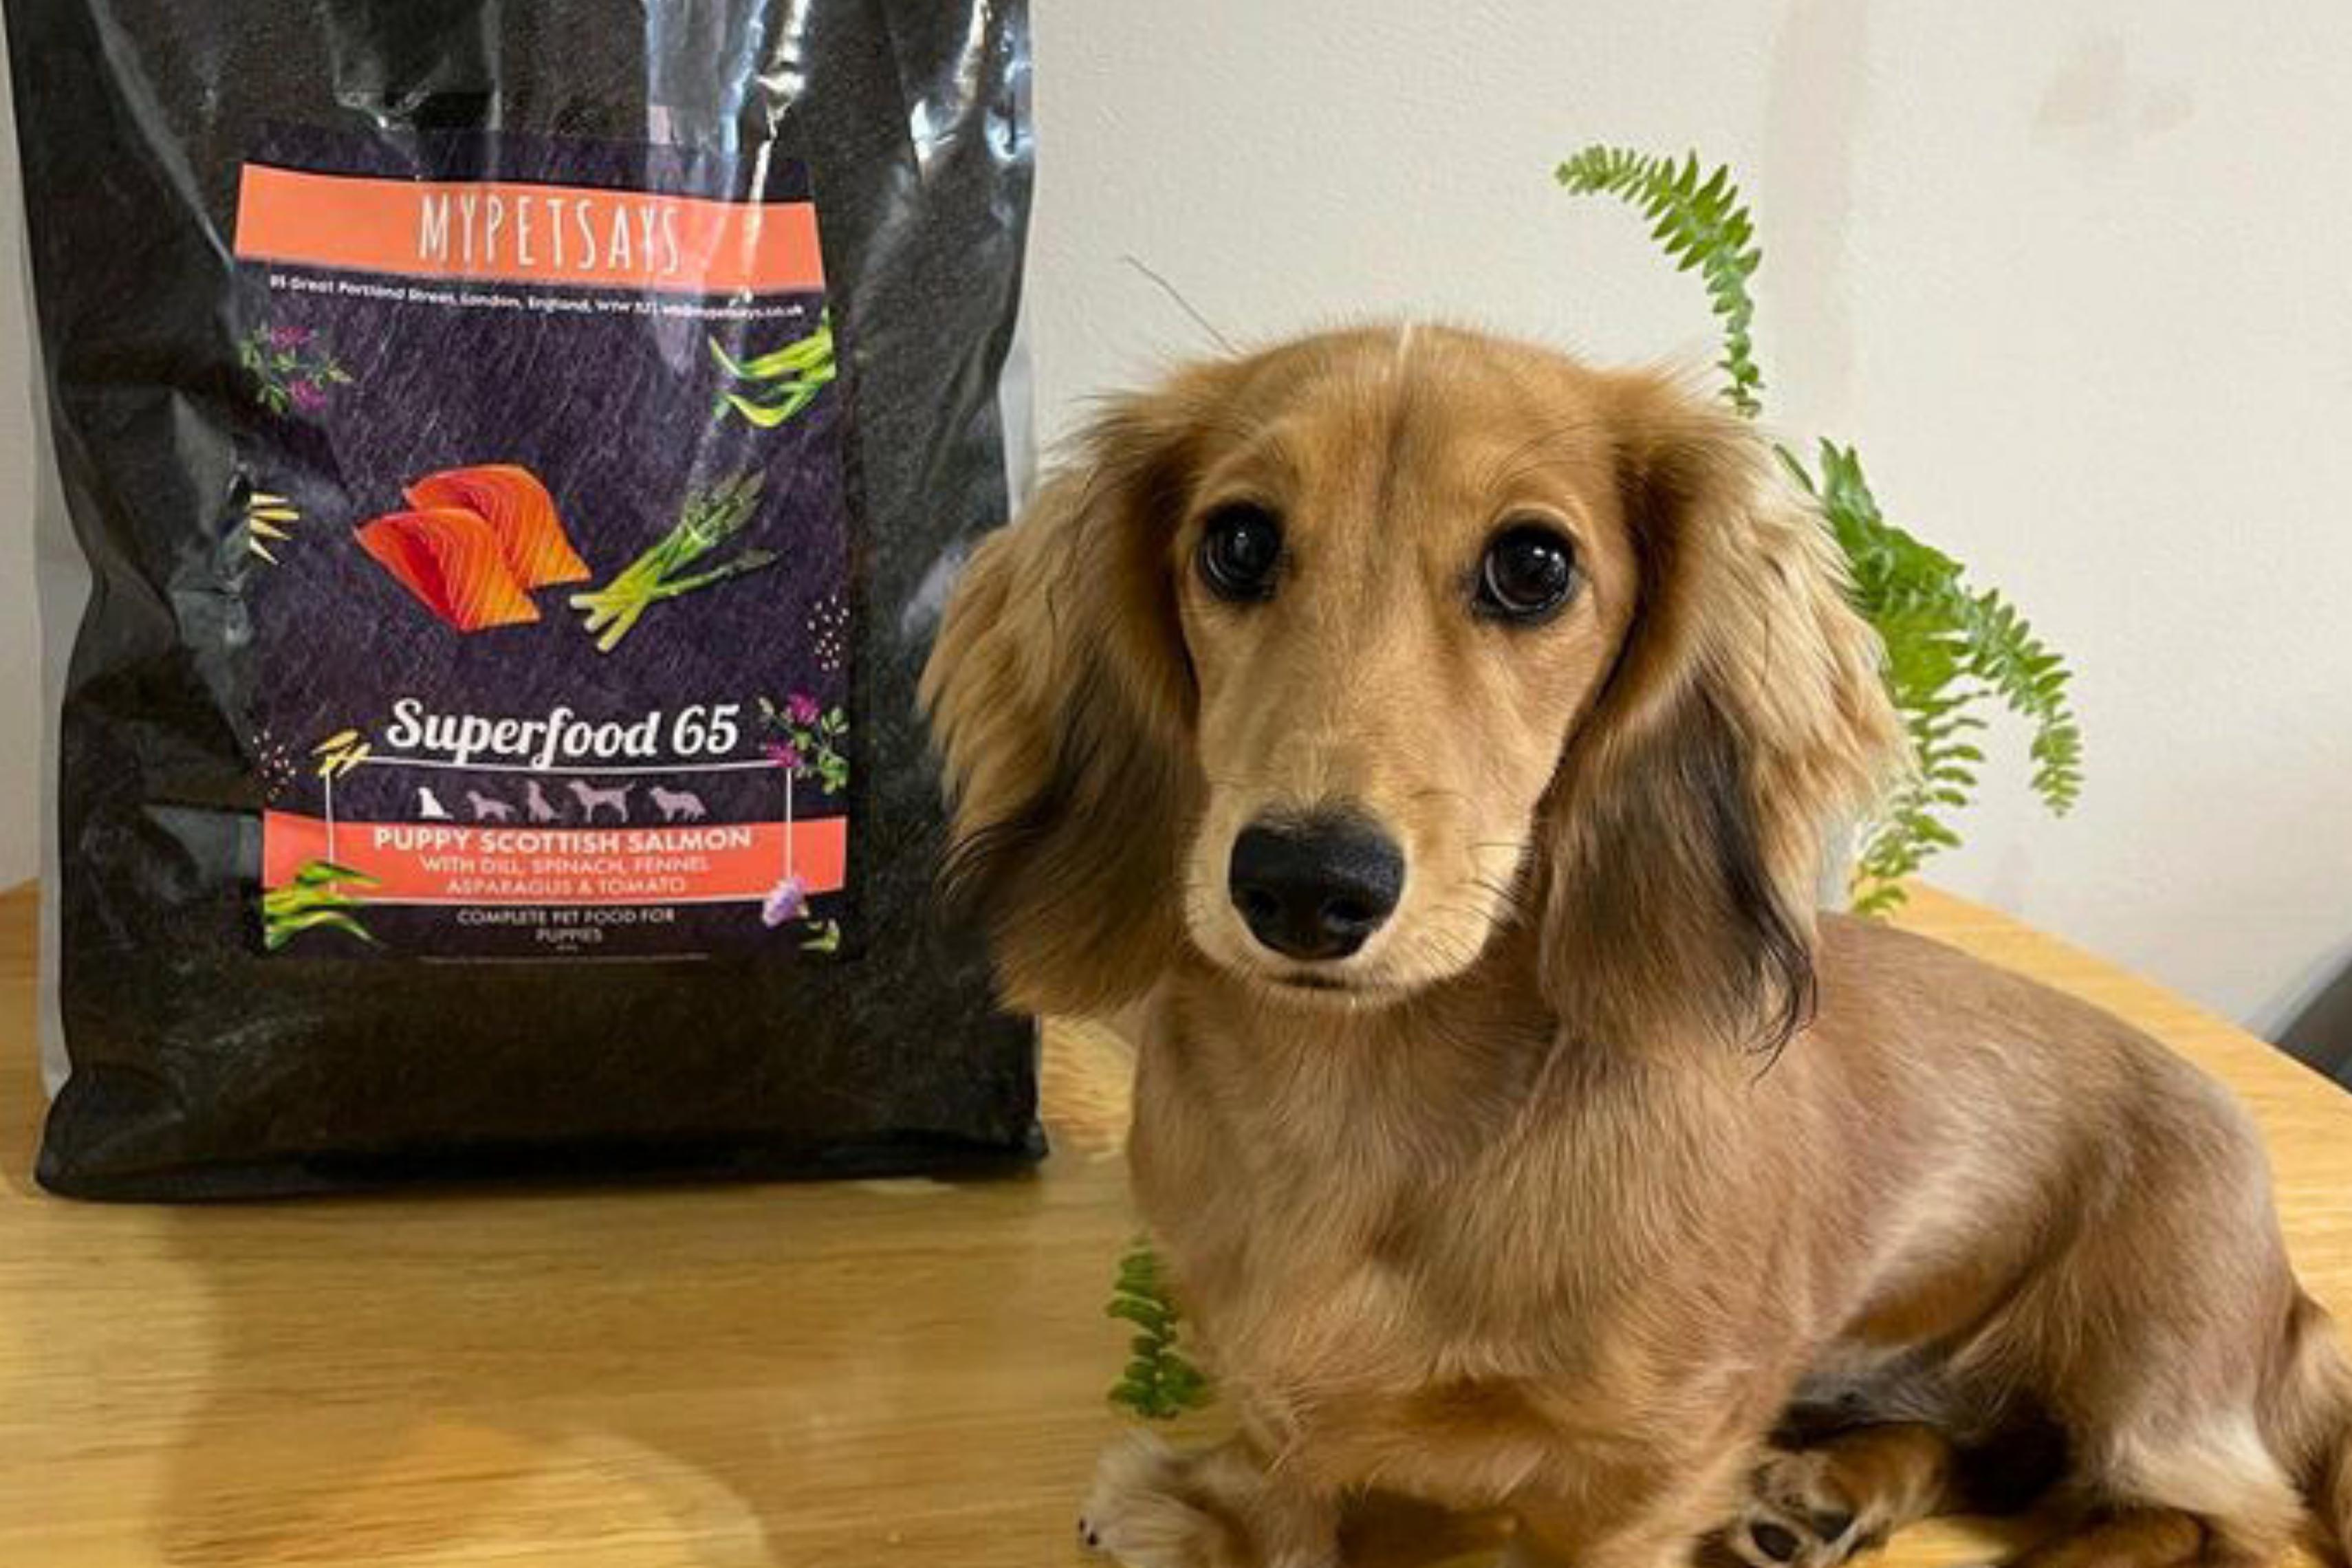 Reasons to choose MyPetSays Superfood 65 - Dachshund Puppy with Superfood 65